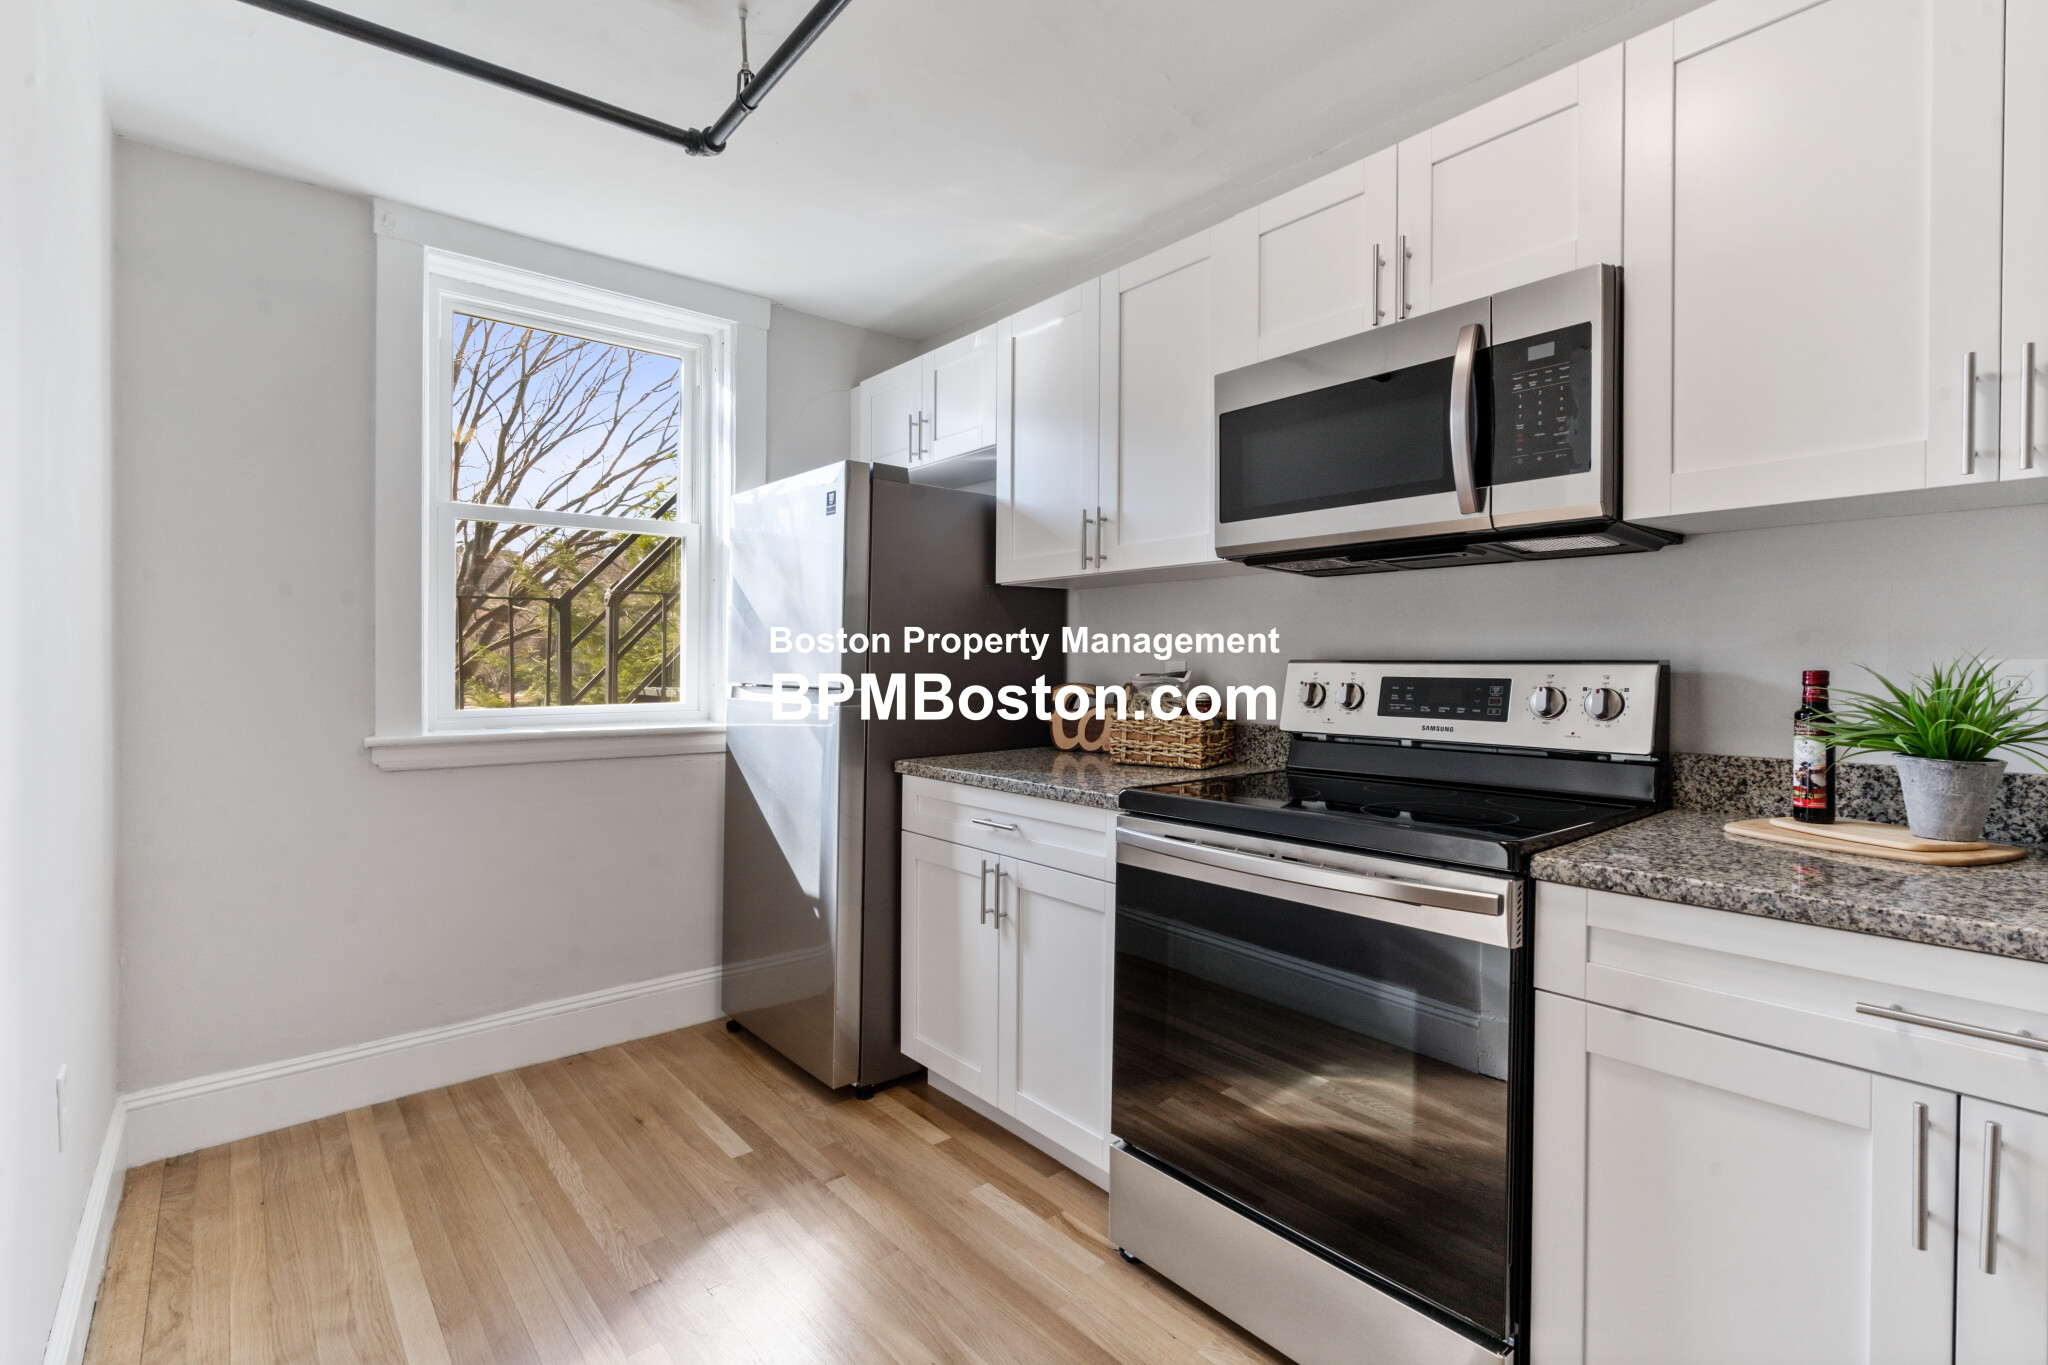 Photos of apartment on Butler,Quincy MA 02169